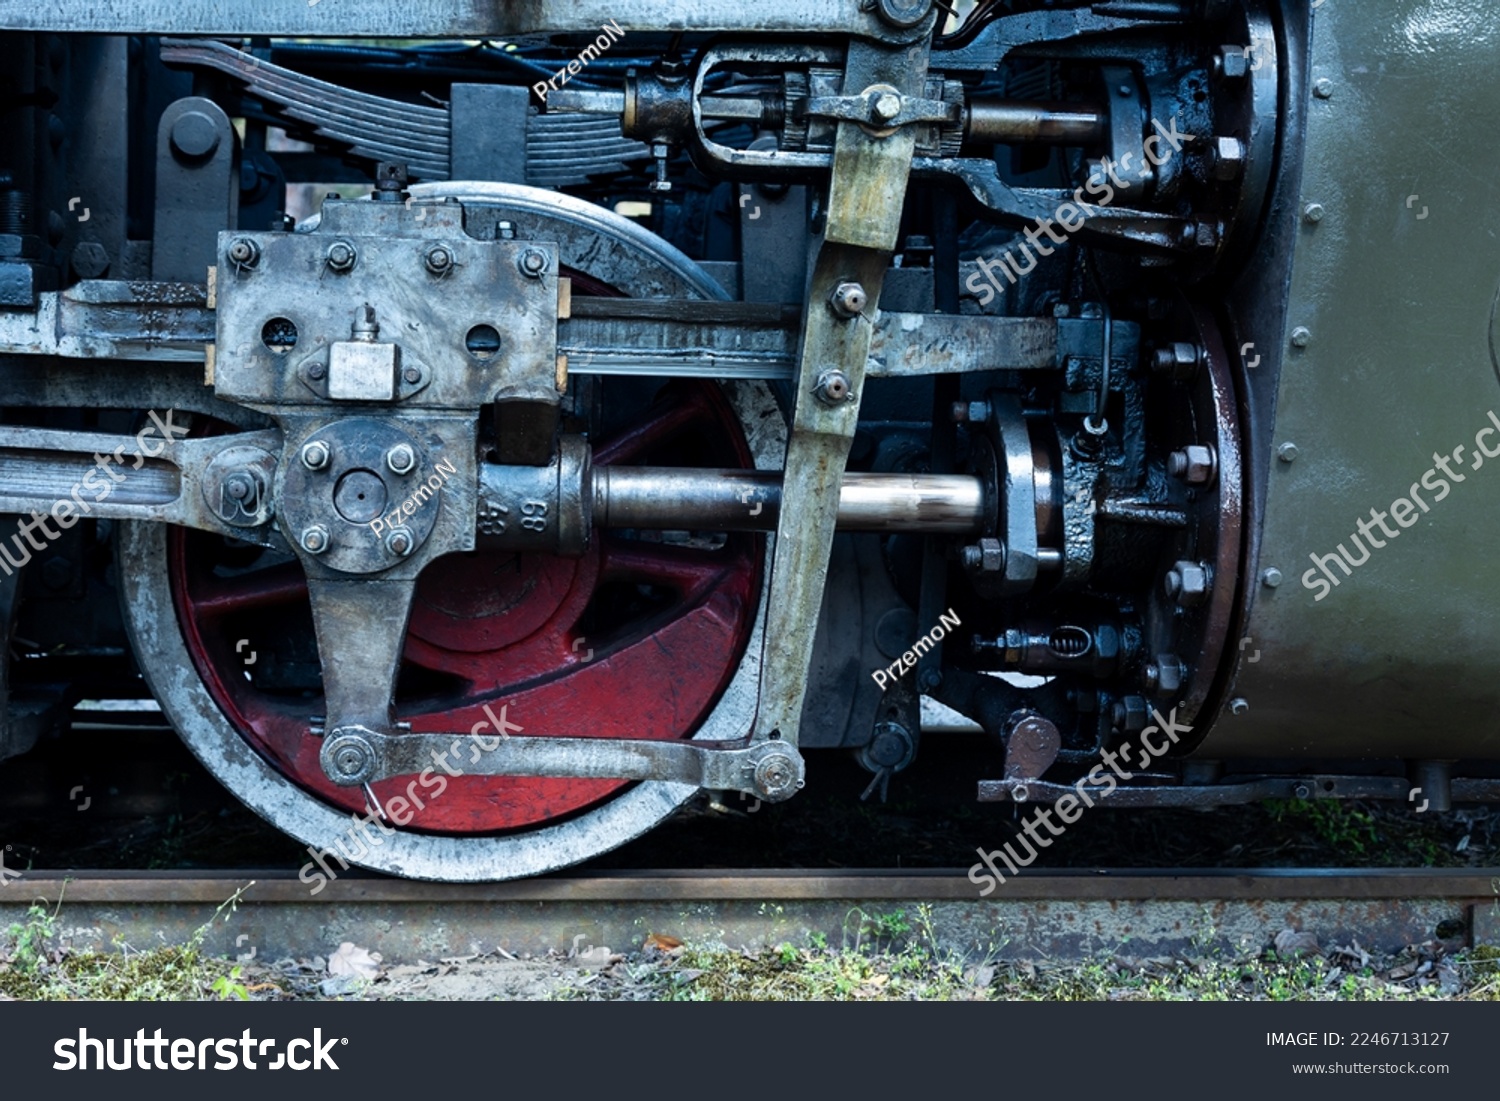 A close-up of a steam locomotive's propulsion system. Steam locomotive standing on the tracks, photo taken in natural lighting conditions. #2246713127